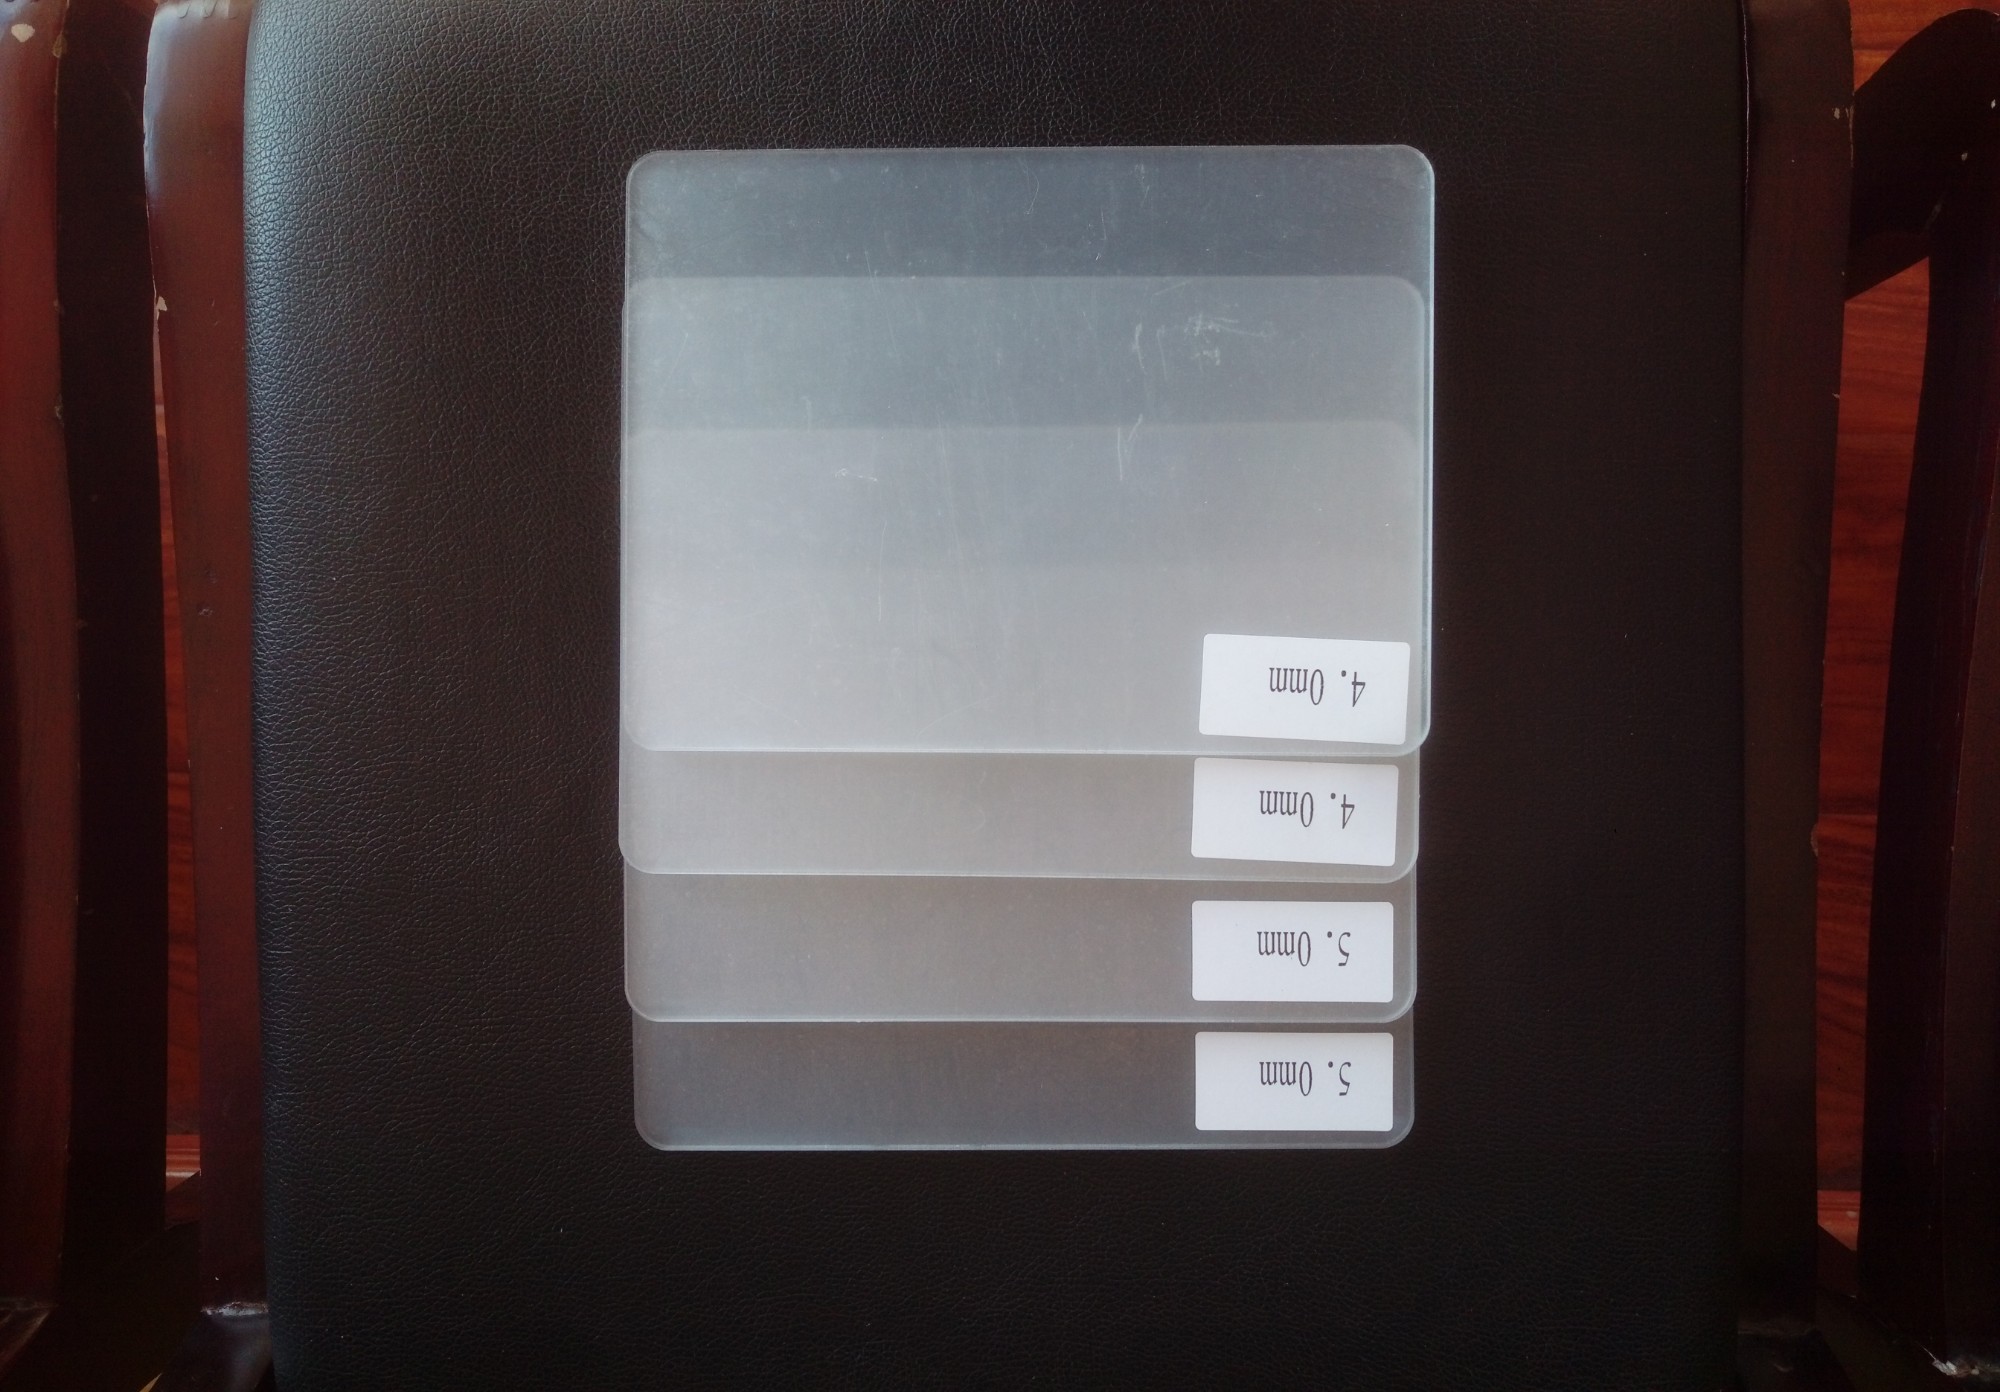 Clear/color 3mm cast acrylic sheet Manufacturers, Clear/color 3mm cast acrylic sheet Factory, Supply Clear/color 3mm cast acrylic sheet